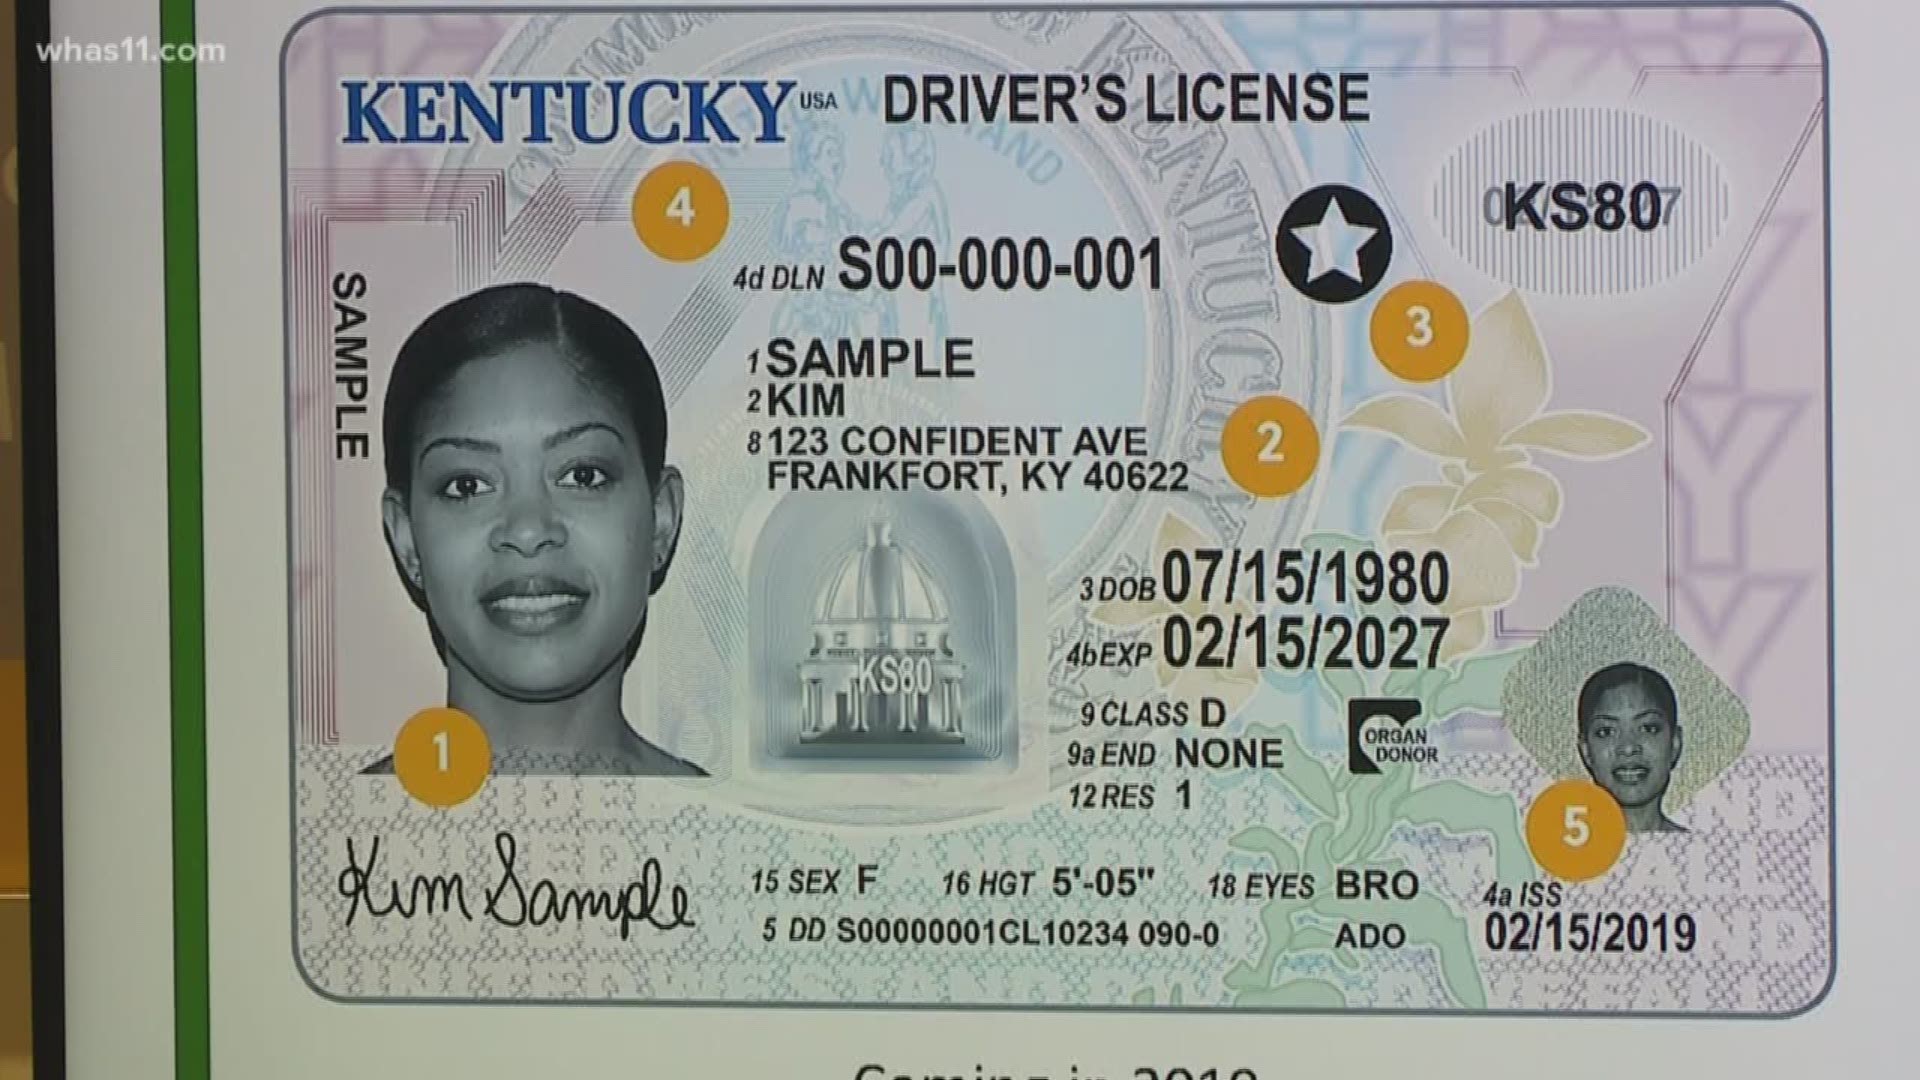 travel driver's license ky